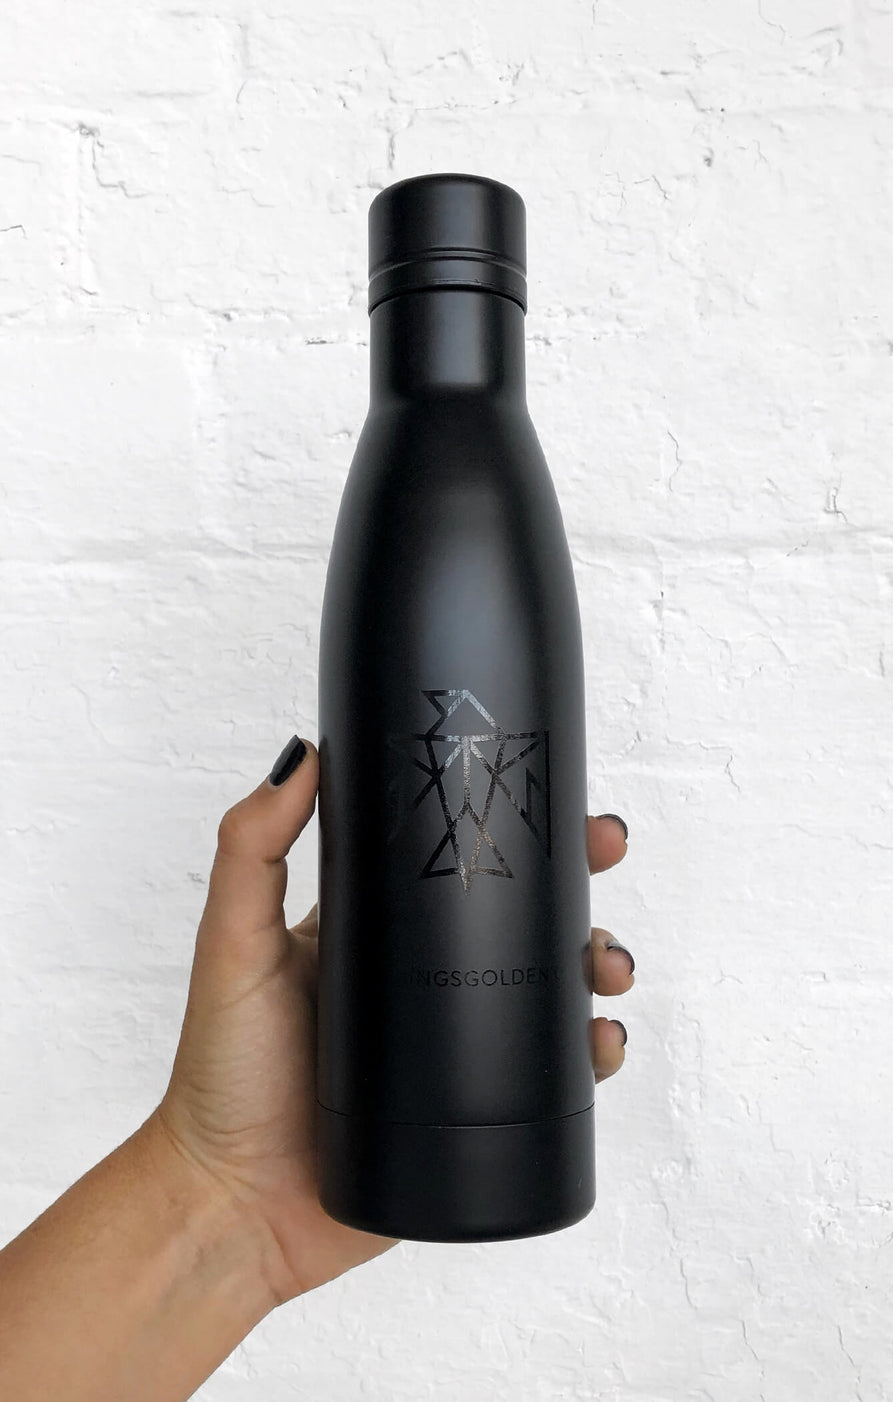 THE A.T.G STAINLESS STEEL BOTTLE